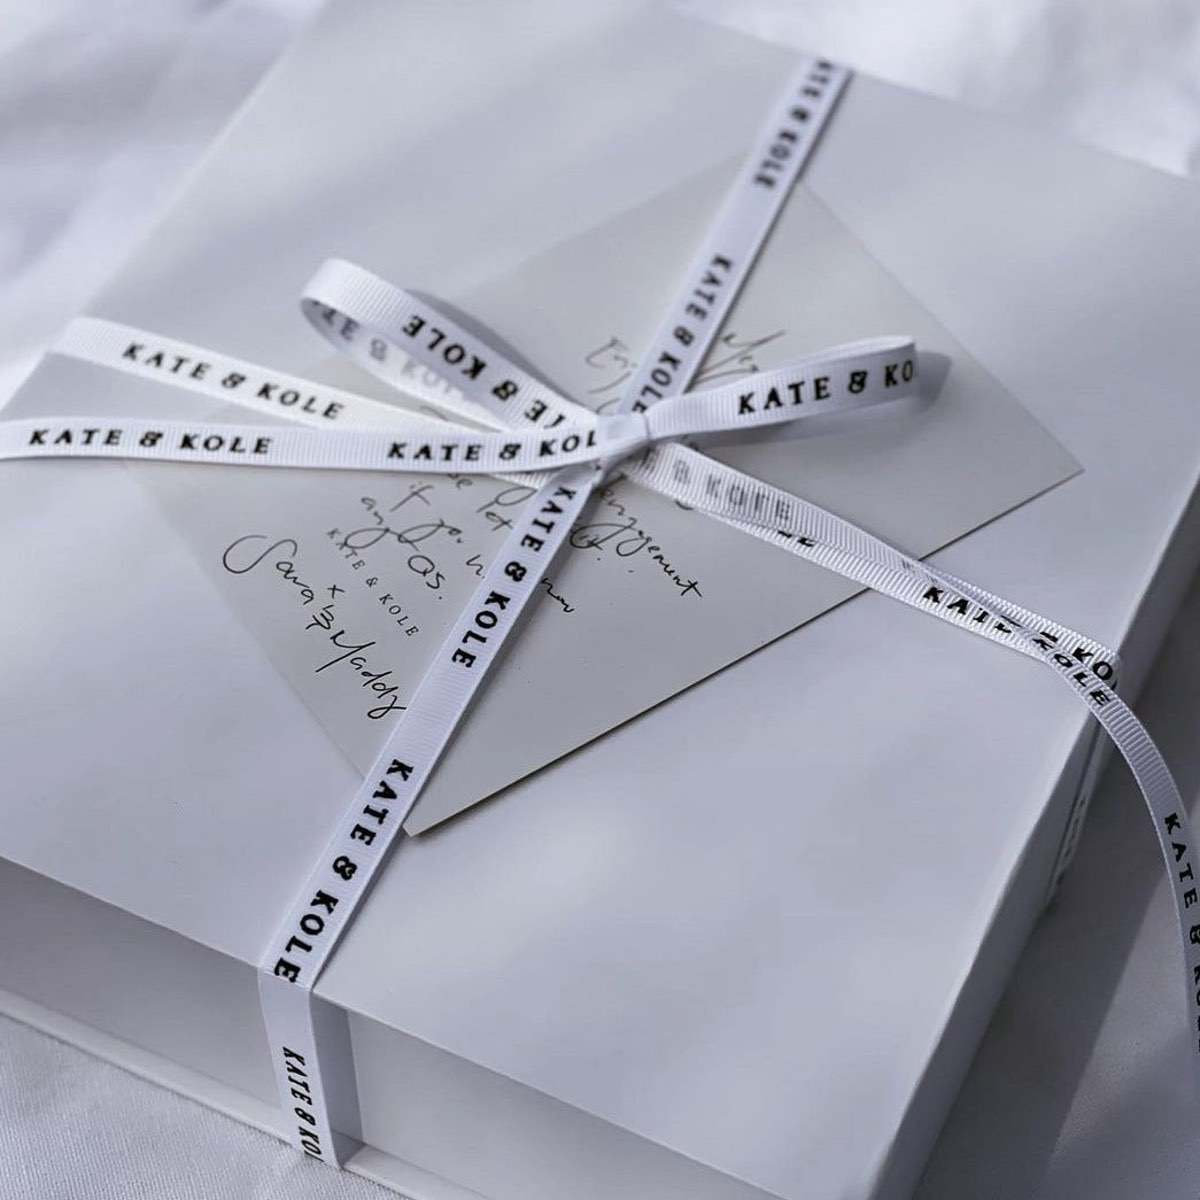 Kate and Kole packaging - box with K&K logo ribbon wrapped around it 